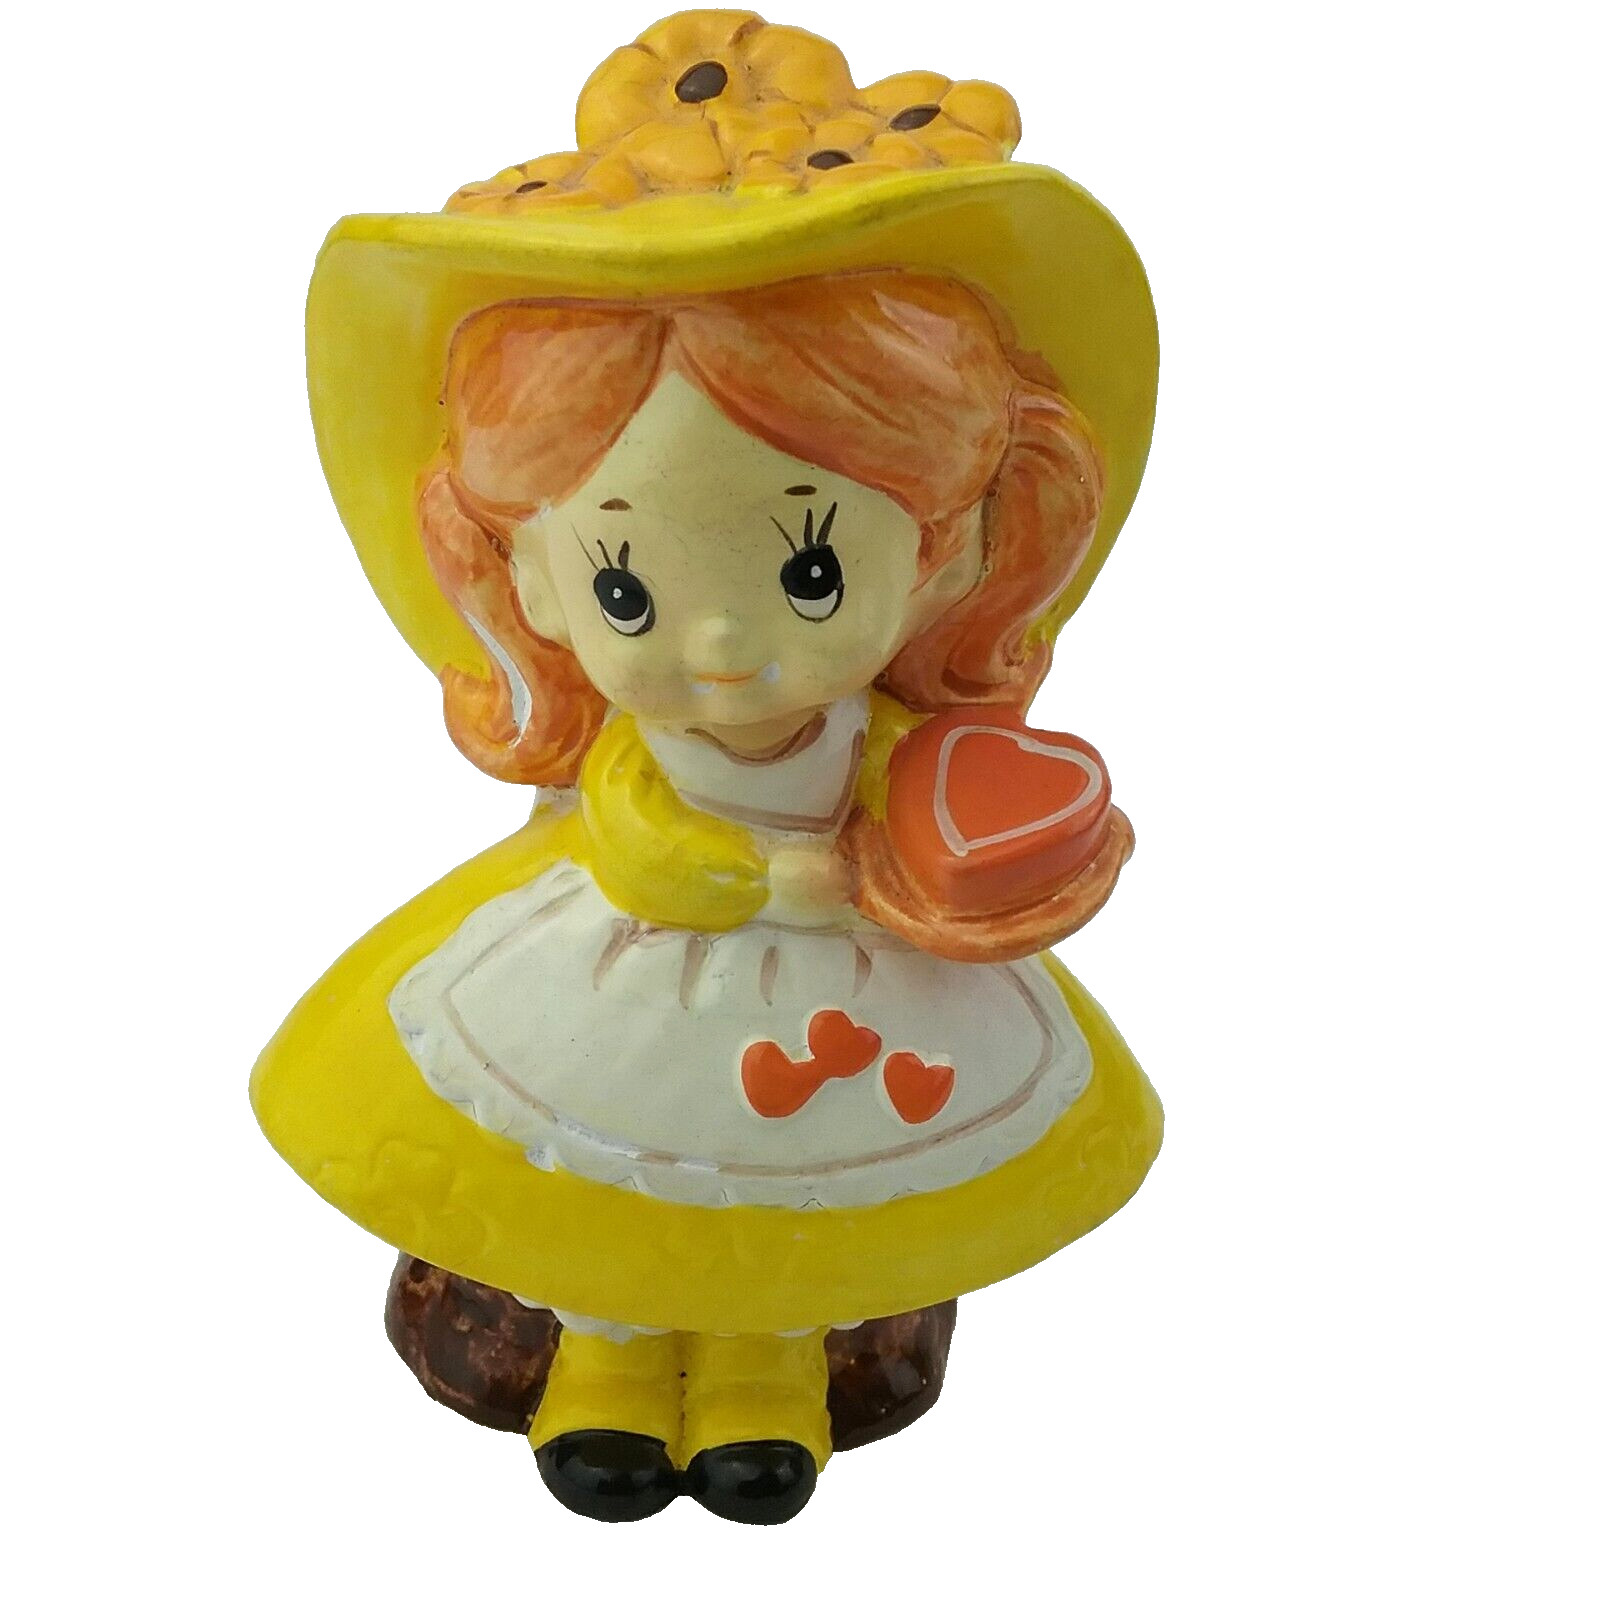 Joseph Originals Figurine Country Girl Red Hair Yellow Outfit Orange Cake Hearts